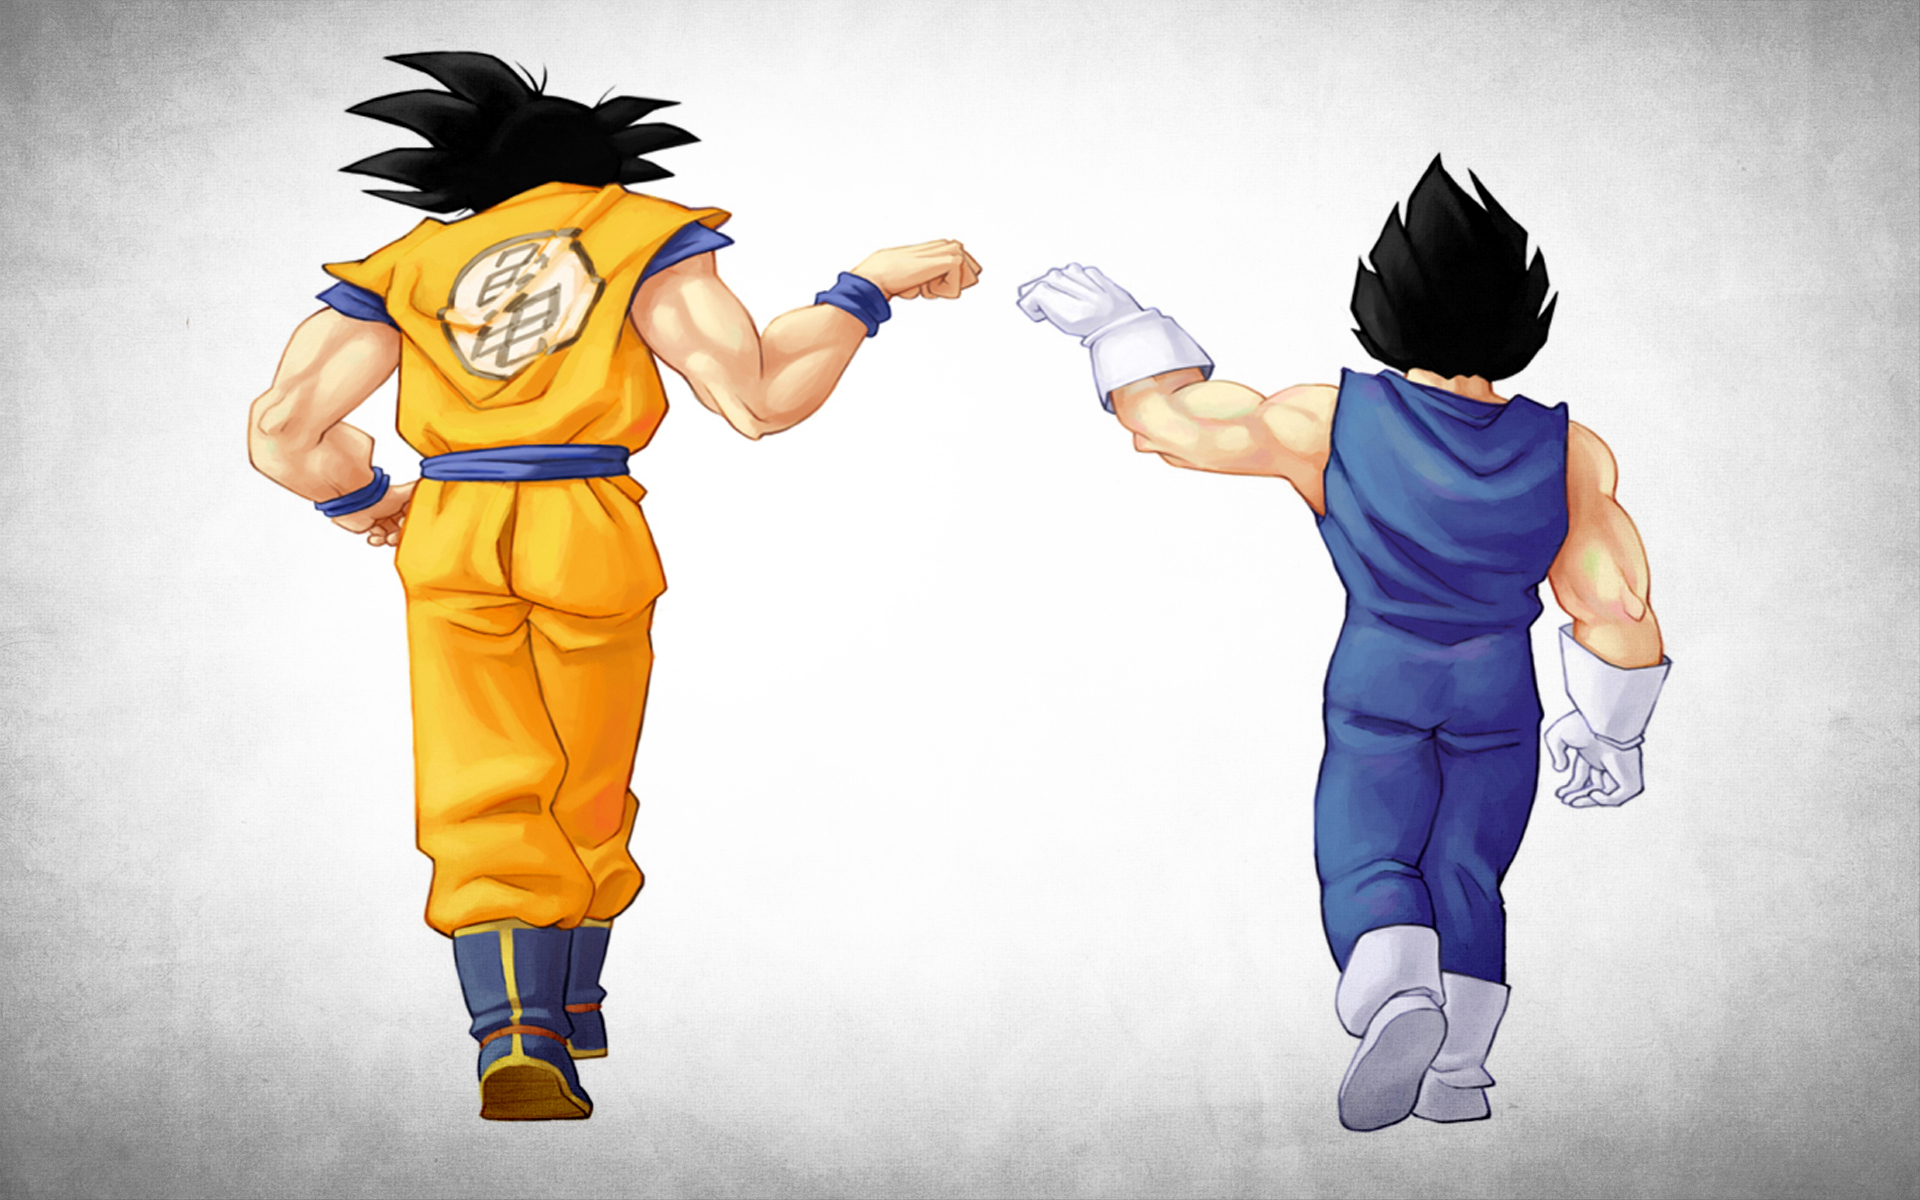 Dragon Ball Z Wallpapers High Quality Download Free